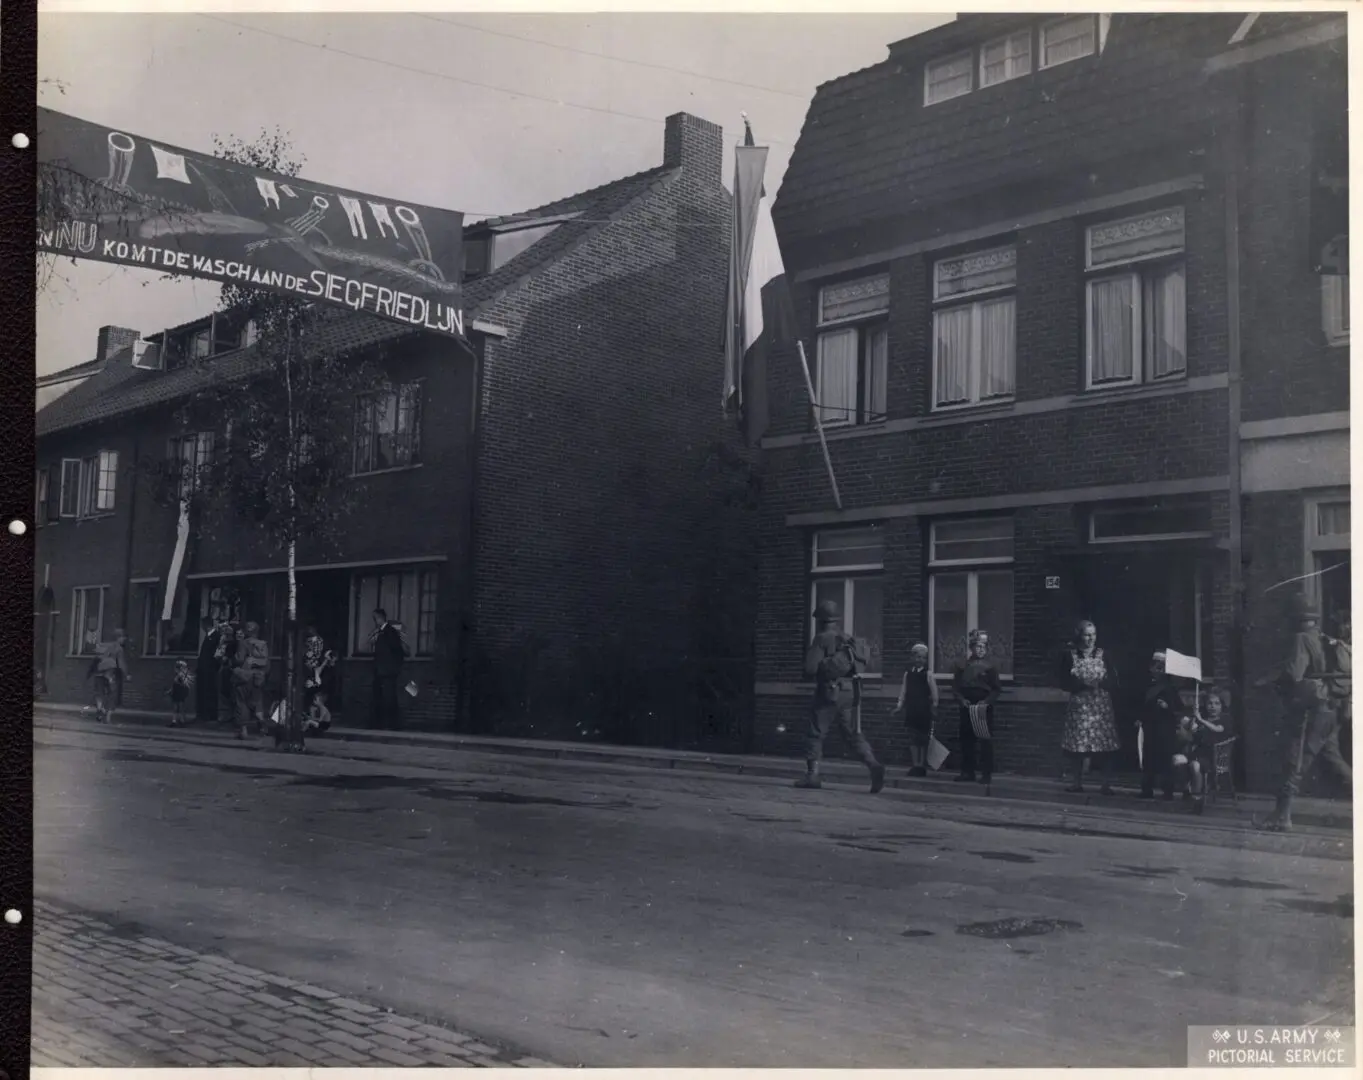 American infantry passing by the streets in a Dutch town